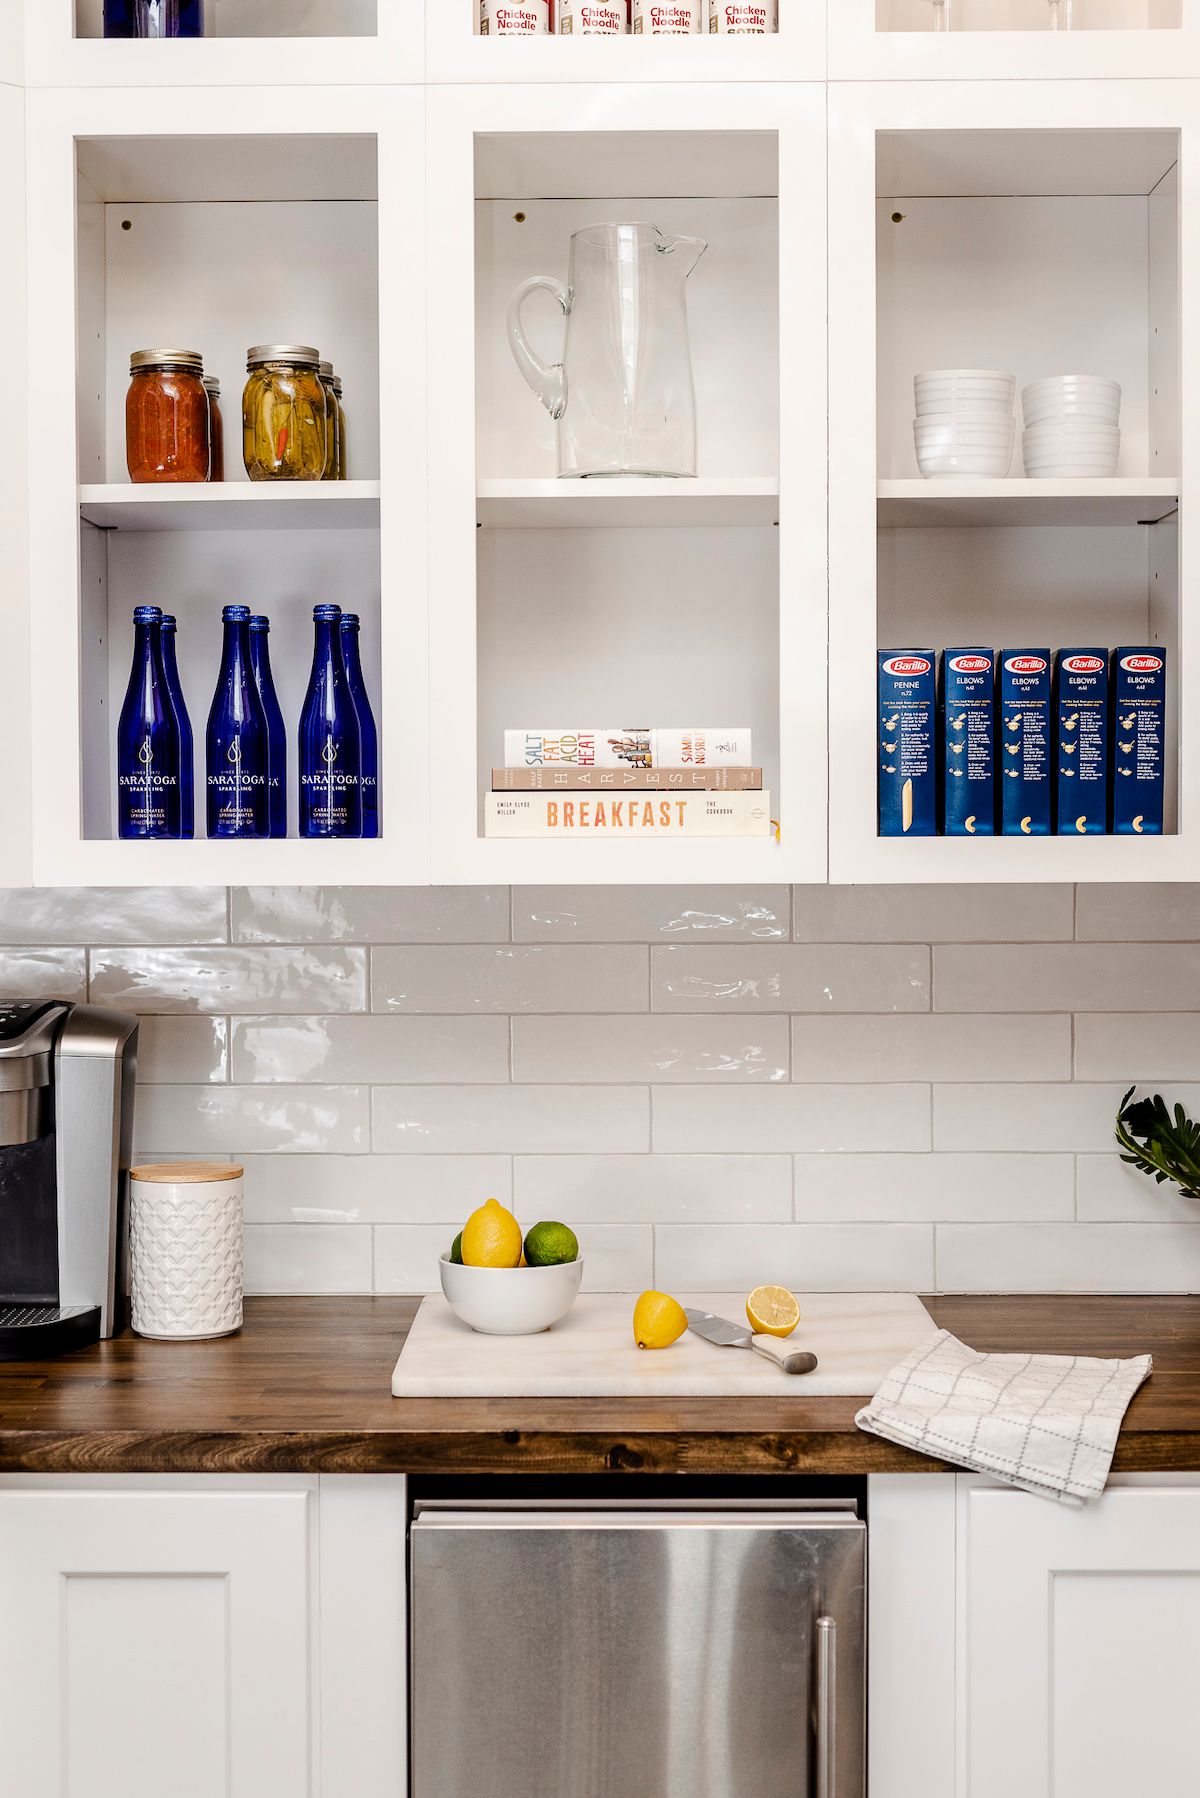 Vevano Pantry Project Cabinets